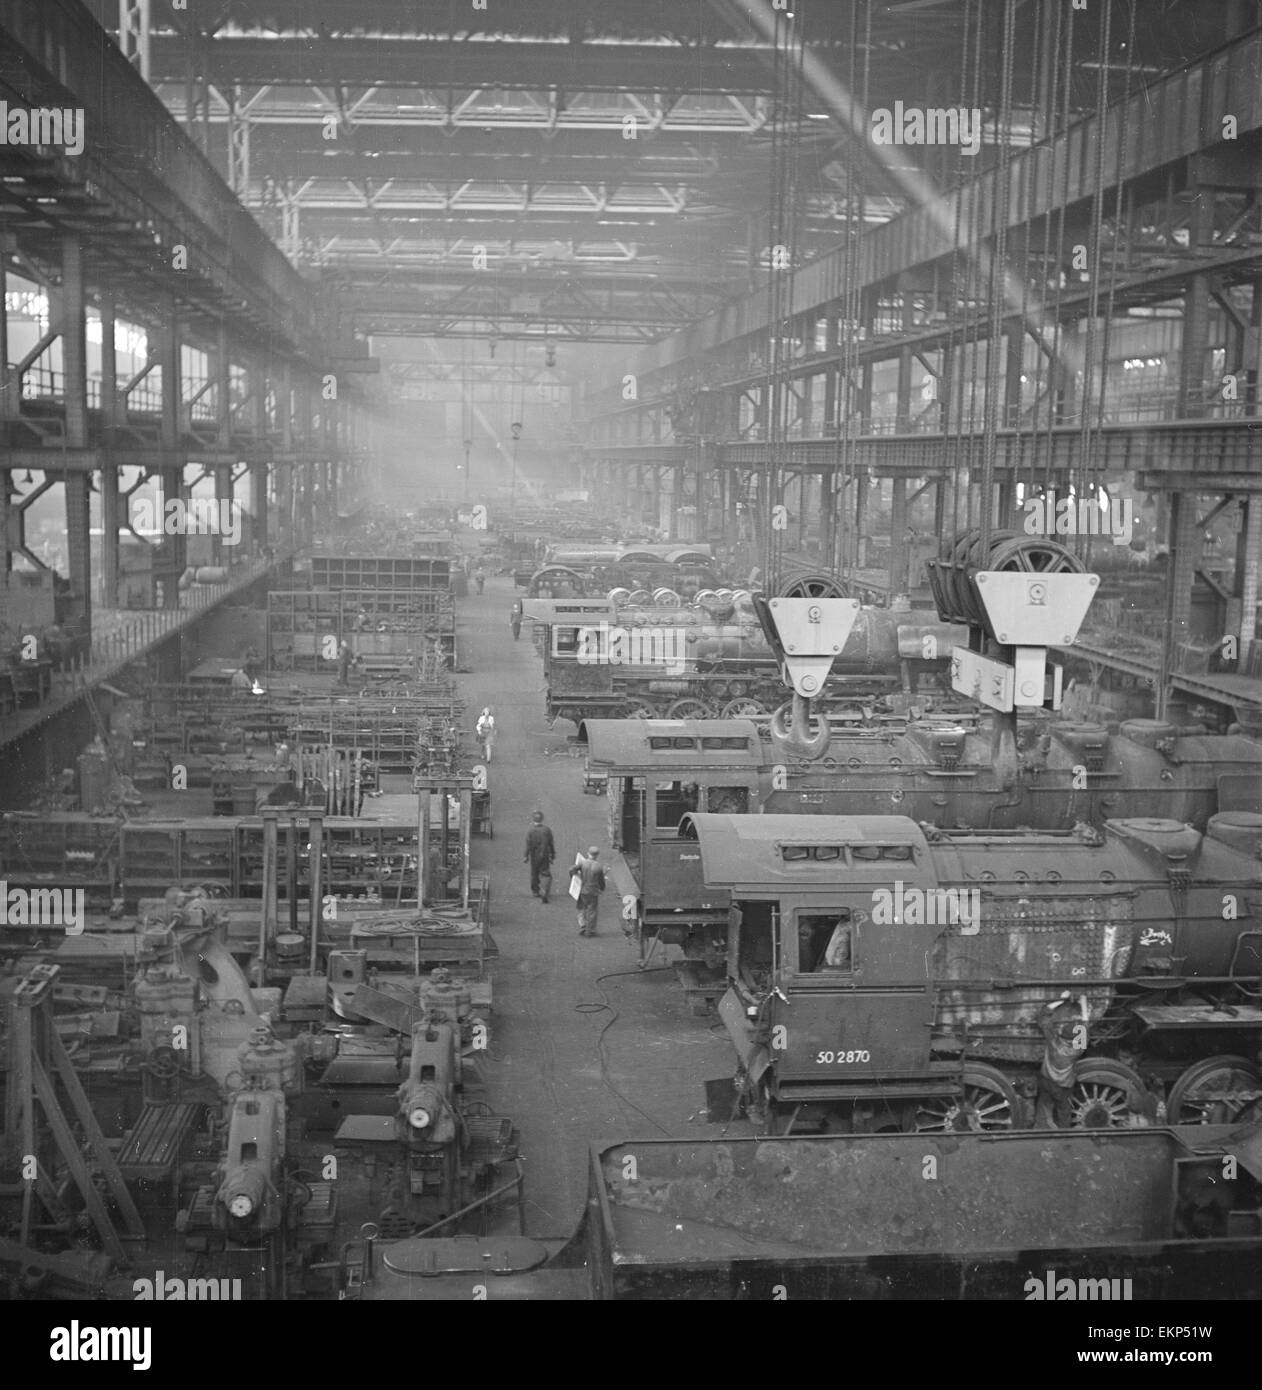 The main workshop at the Lowa Montages Fabrik Steam Locomotive repair facility in Essen, Germany. The factory formerly owned by Krupps employs 1,500 men and during the war this factory made tanks. Since June 1945 the factory has worked on locomotives and Stock Photo